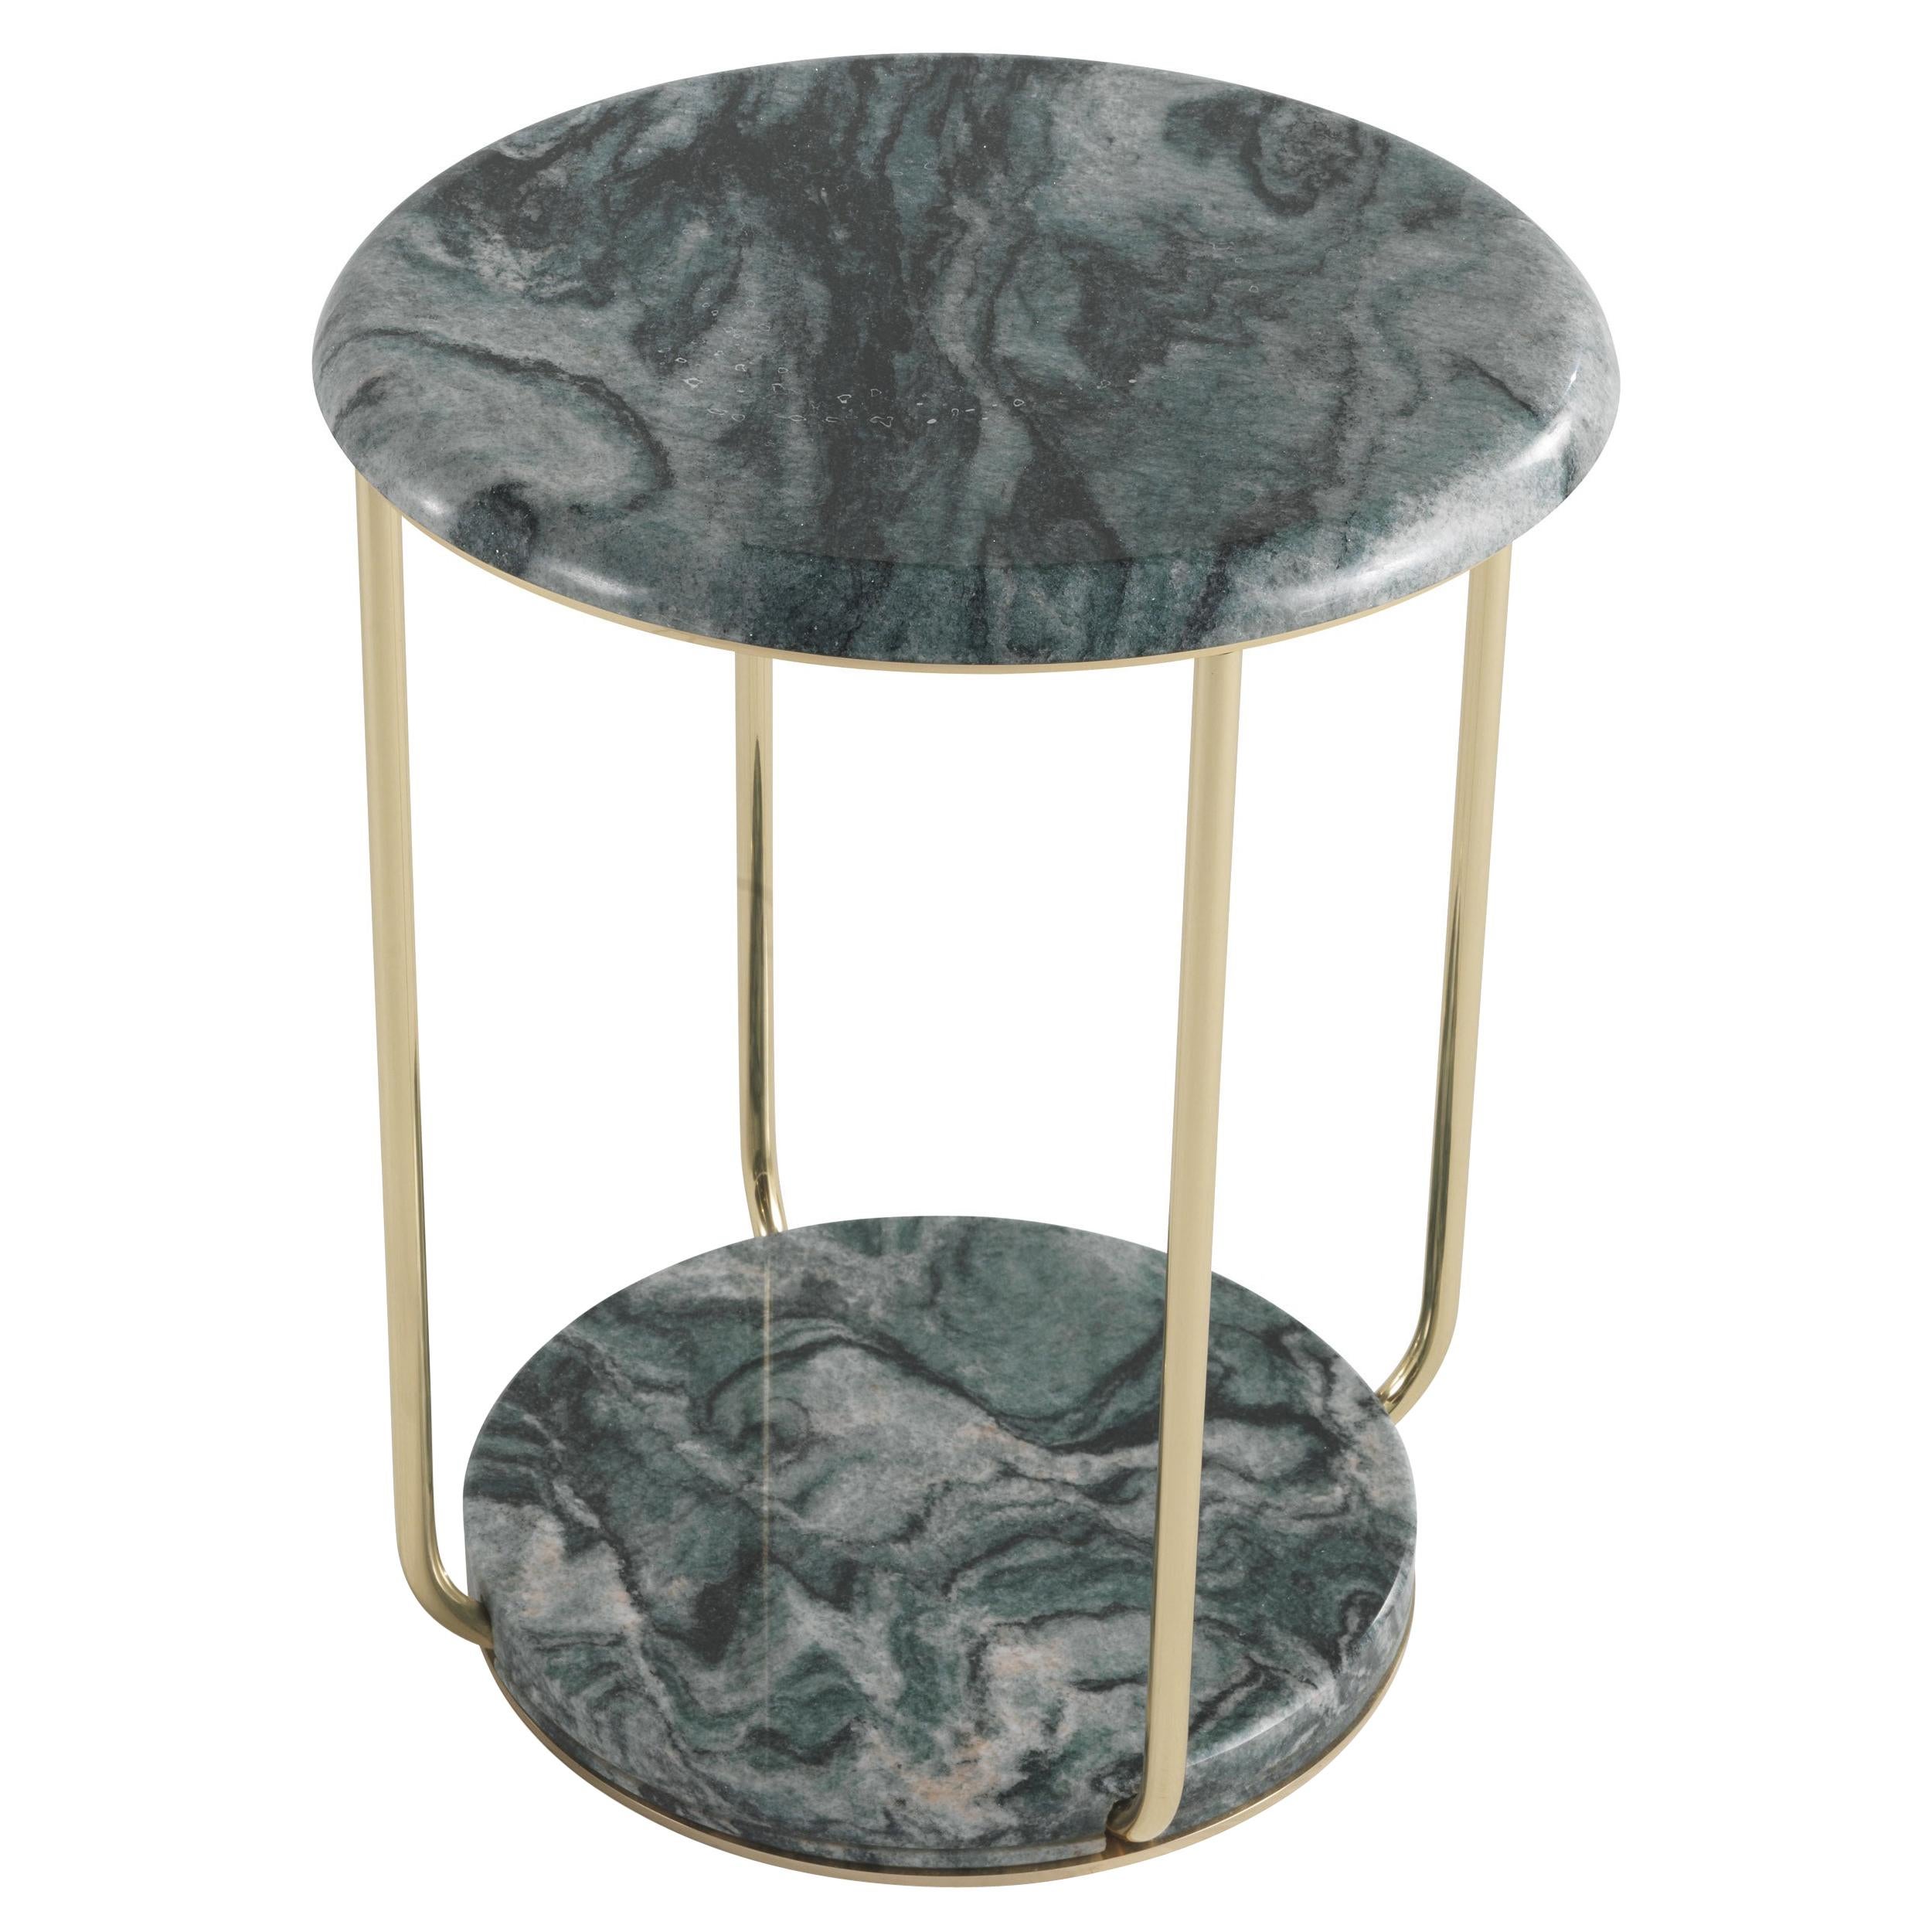 21st Century Ambar Small Table in Green Marble and Brass by Etro Home Interiors